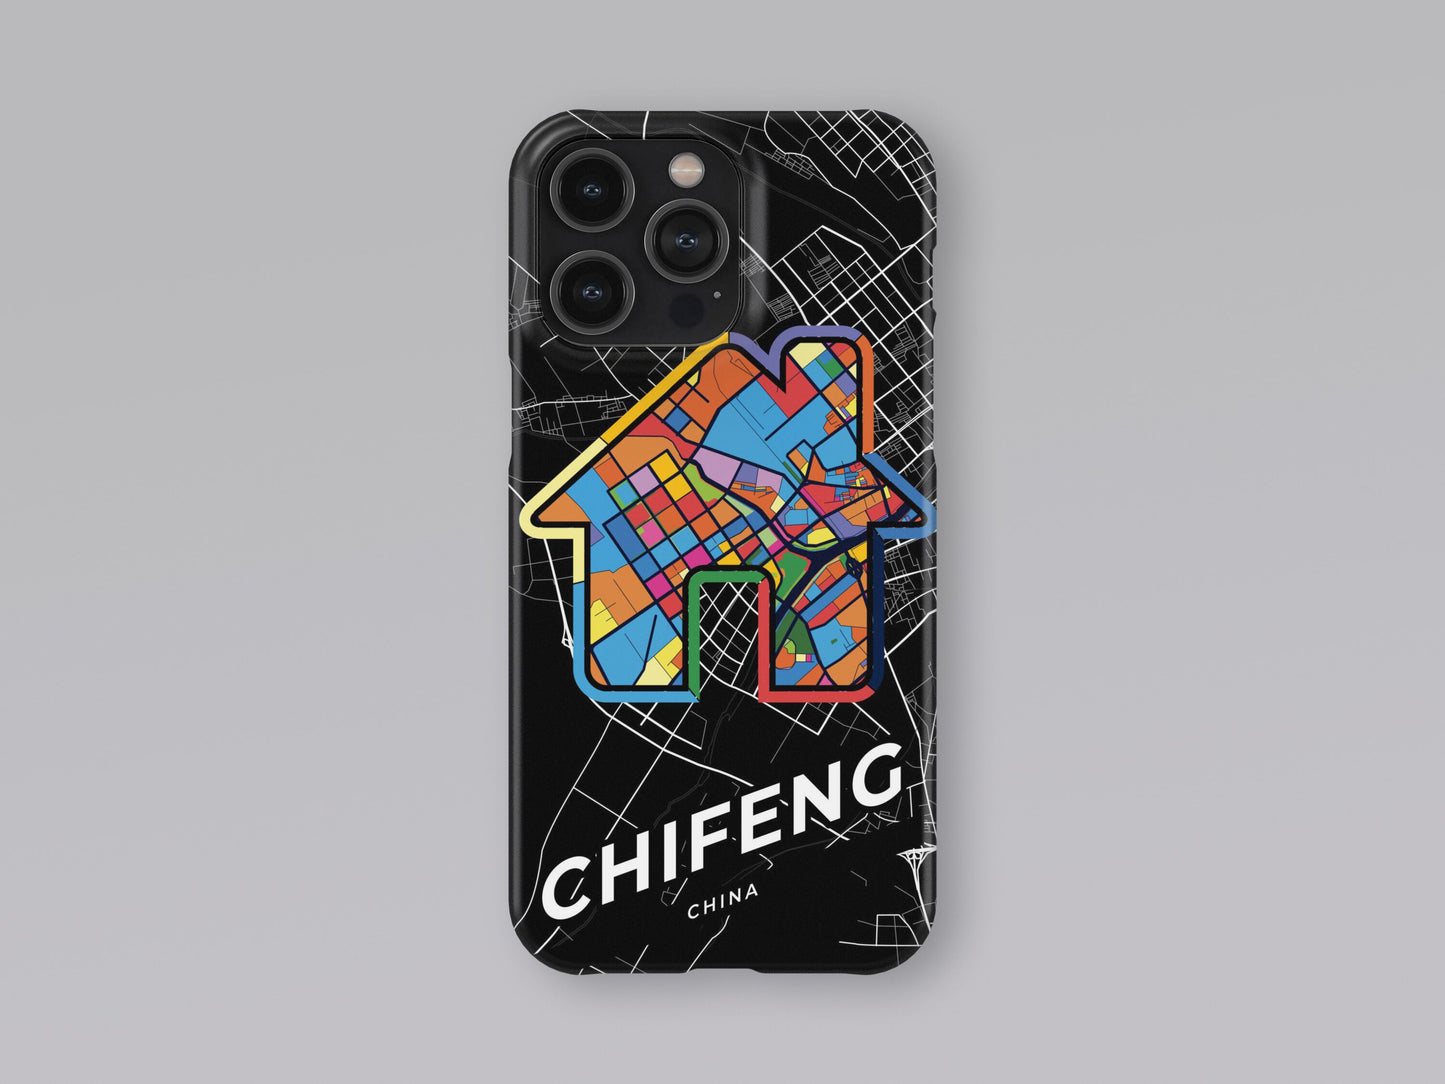 Chifeng China slim phone case with colorful icon. Birthday, wedding or housewarming gift. Couple match cases. 3